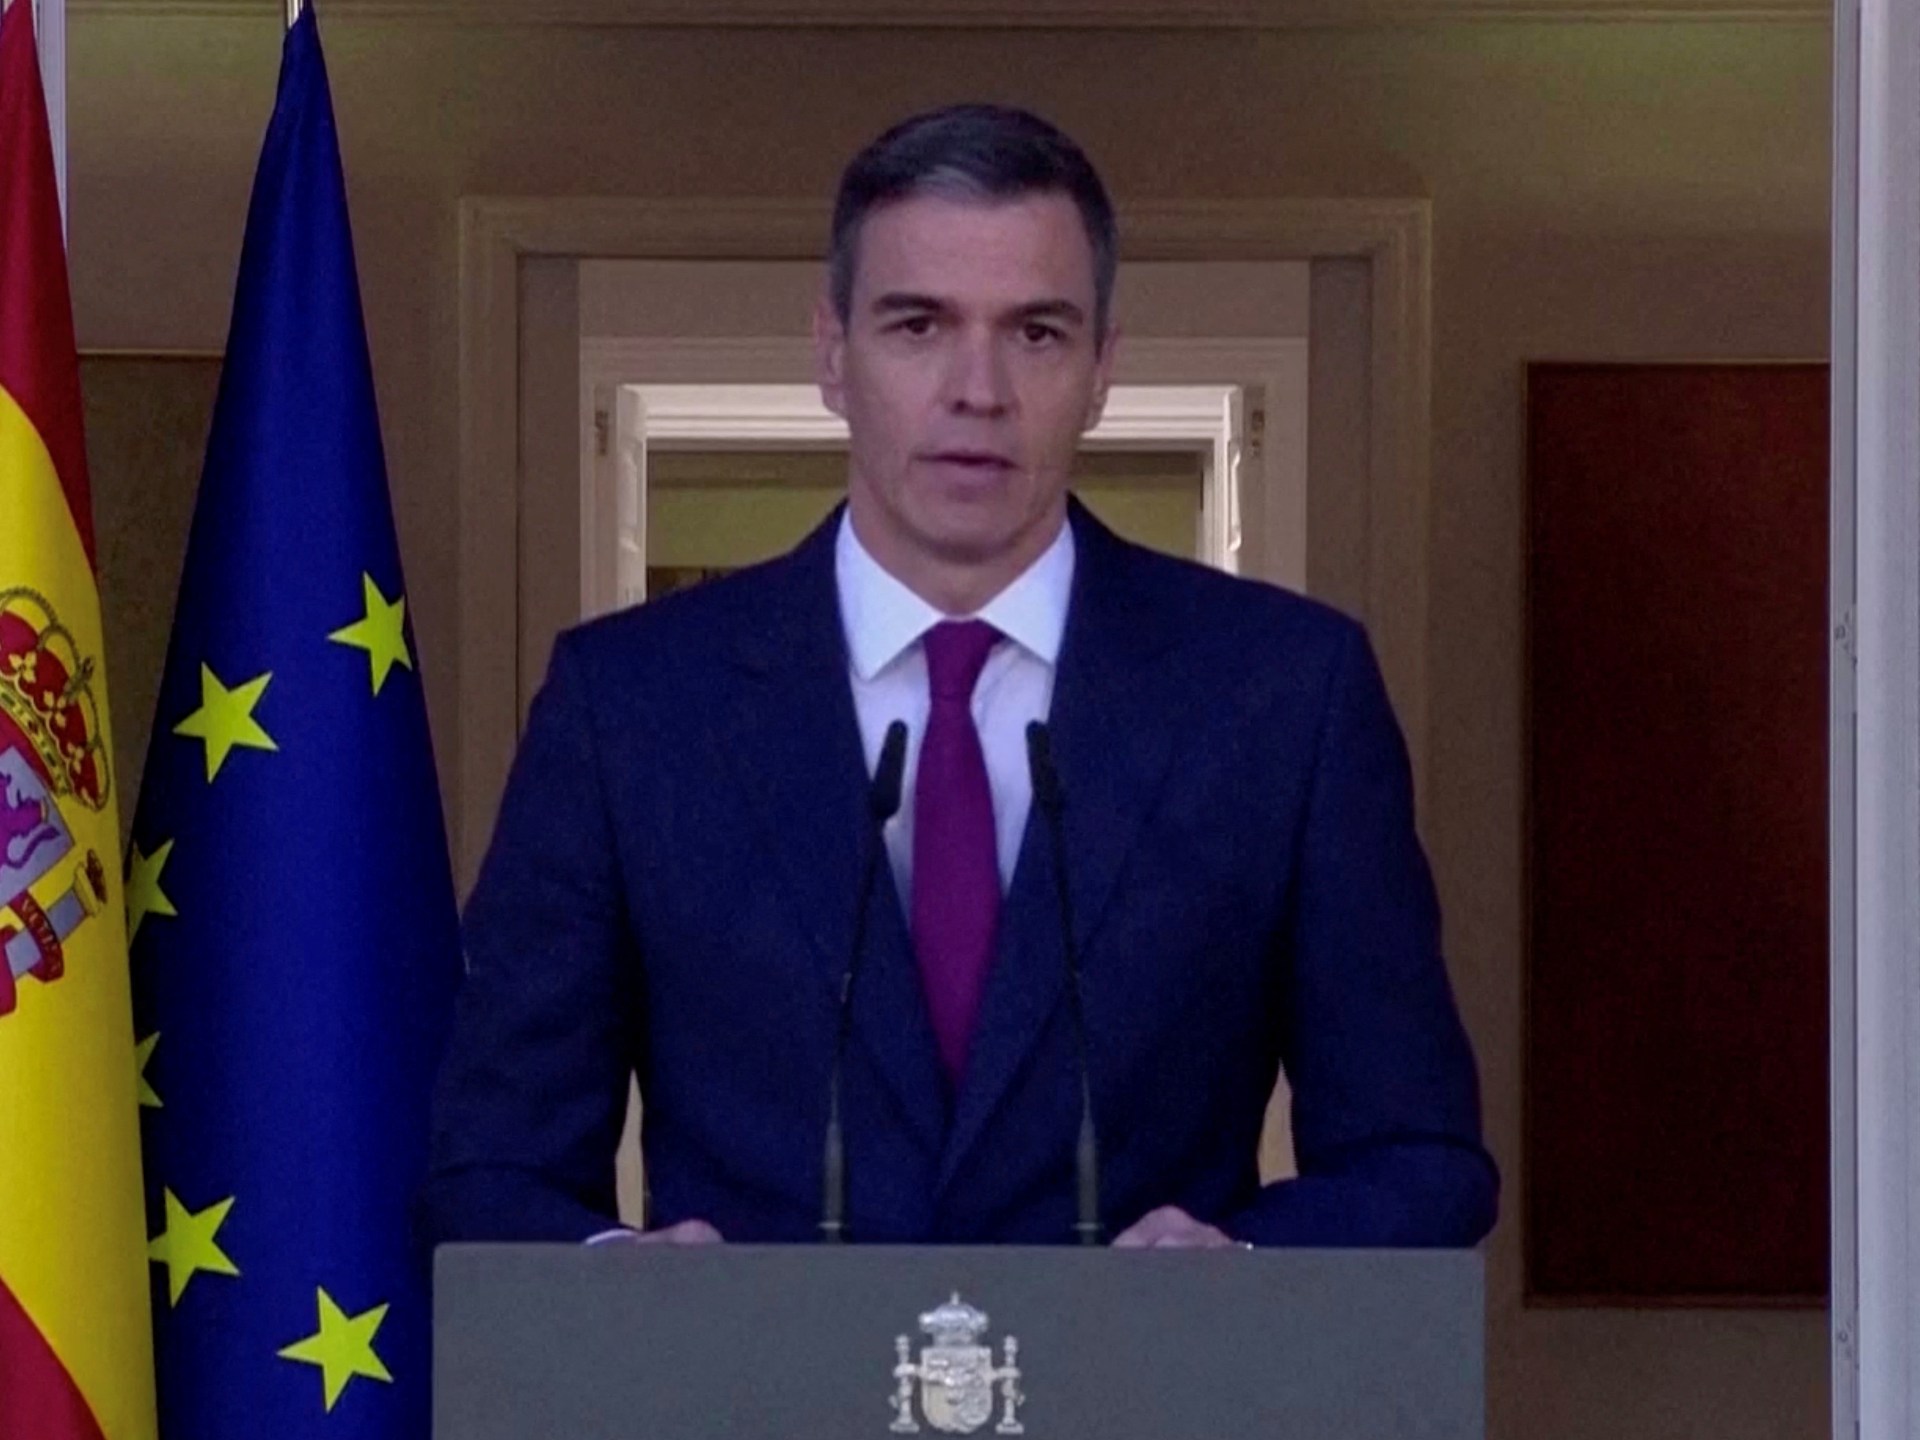 Spain’s Sanchez drama: After toying with resignation, PM draws criticism